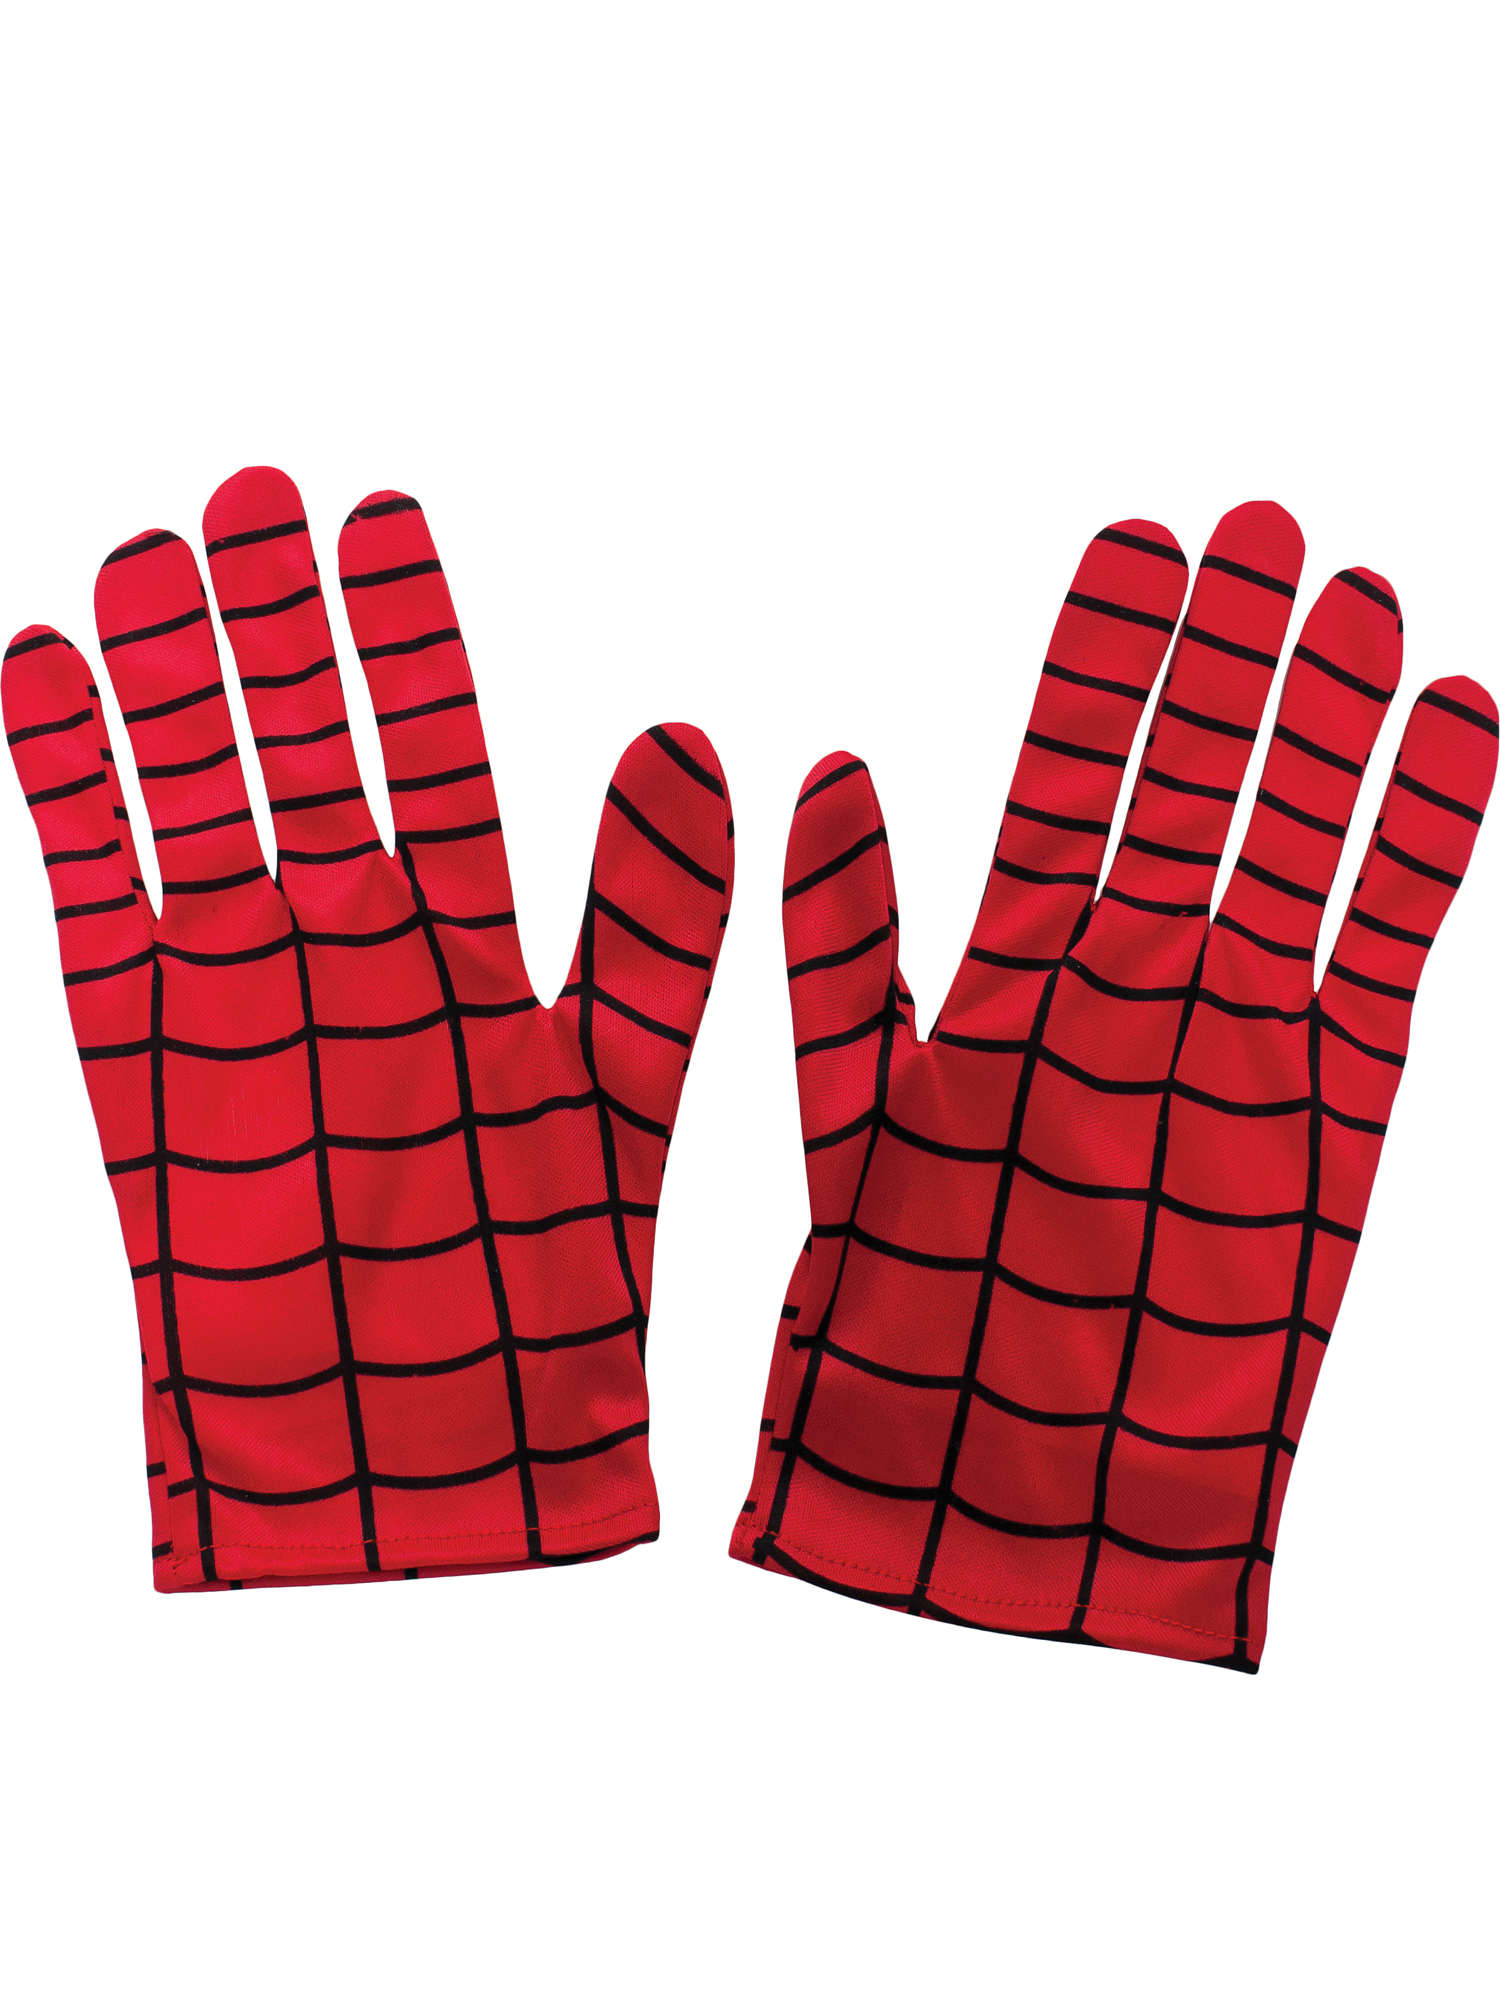 Spider-Man, Avengers, Multi, Marvel, Accessories, One Size, Front